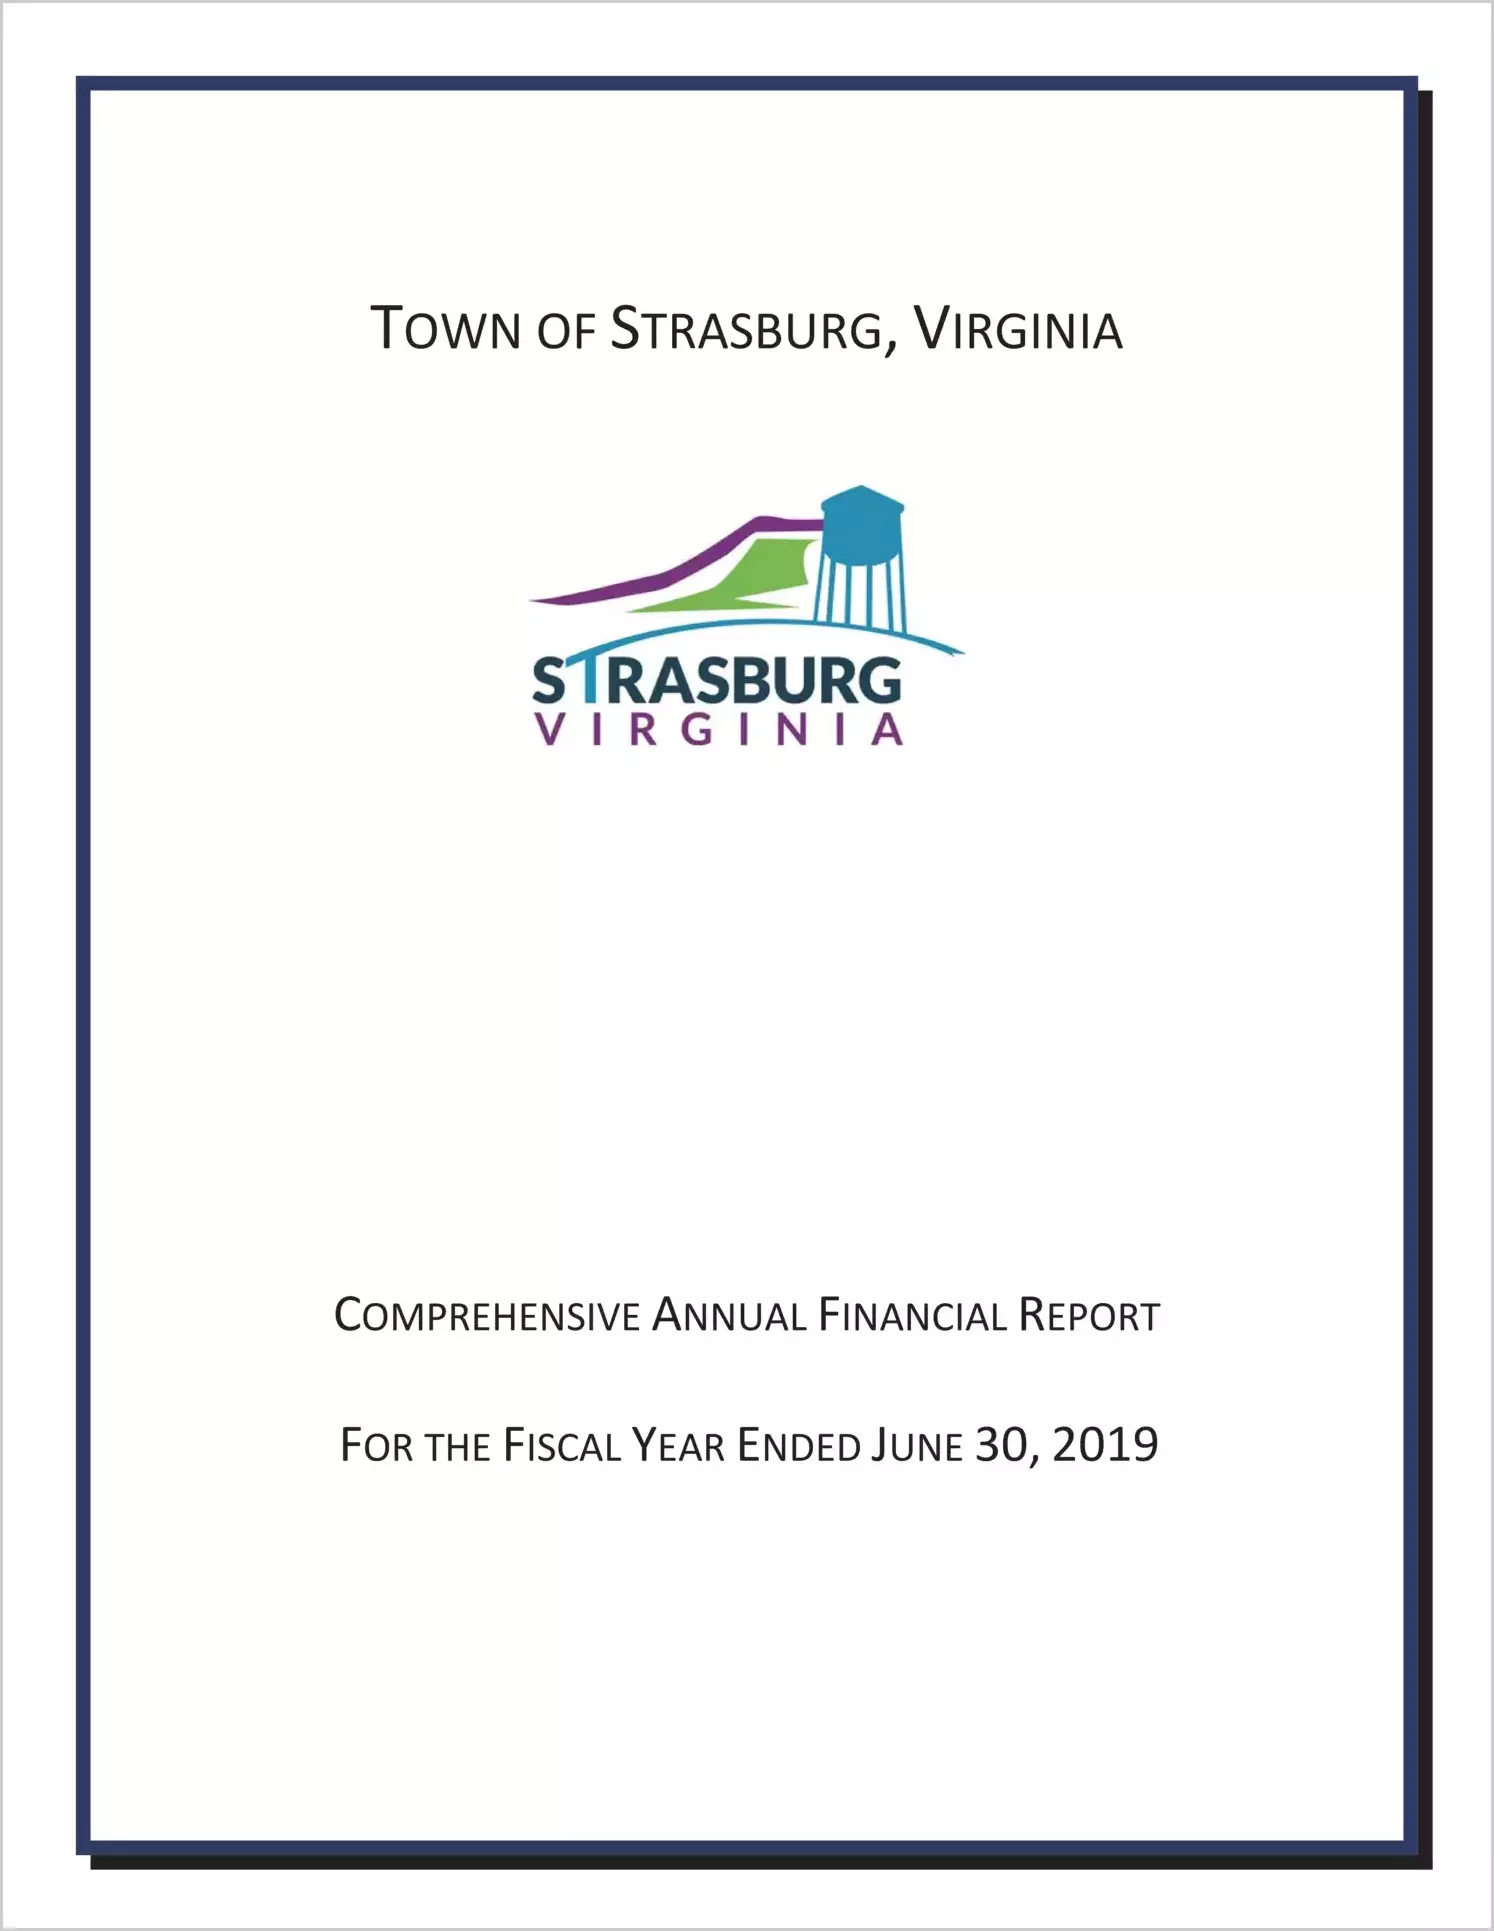 2019 Annual Financial Report for Town of Strasburg